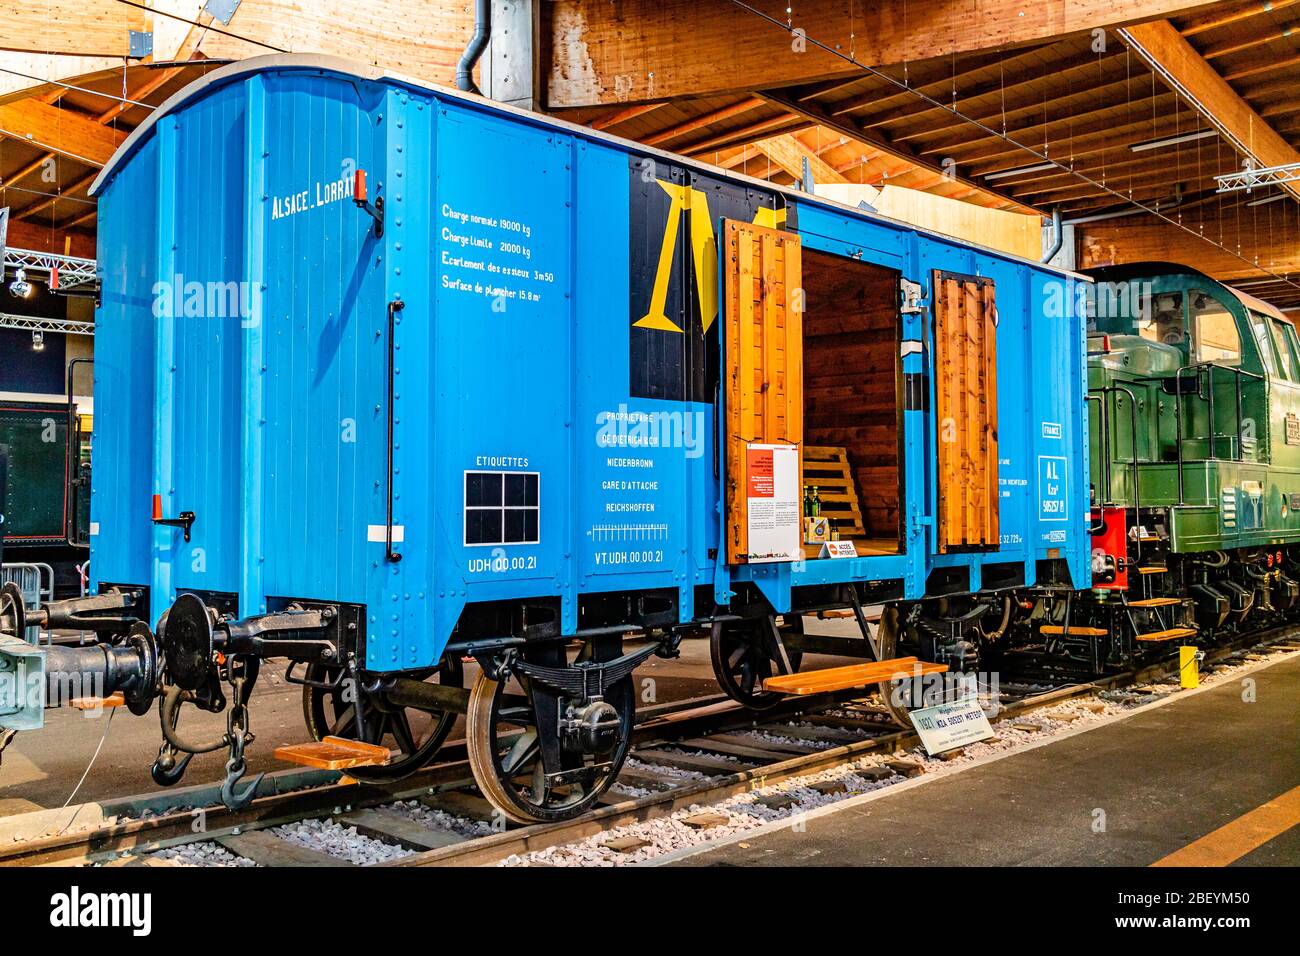 A wooden goods truck, now on display in the Cité du Train railway museum in Mulhouse, France. February 2020. Stock Photo